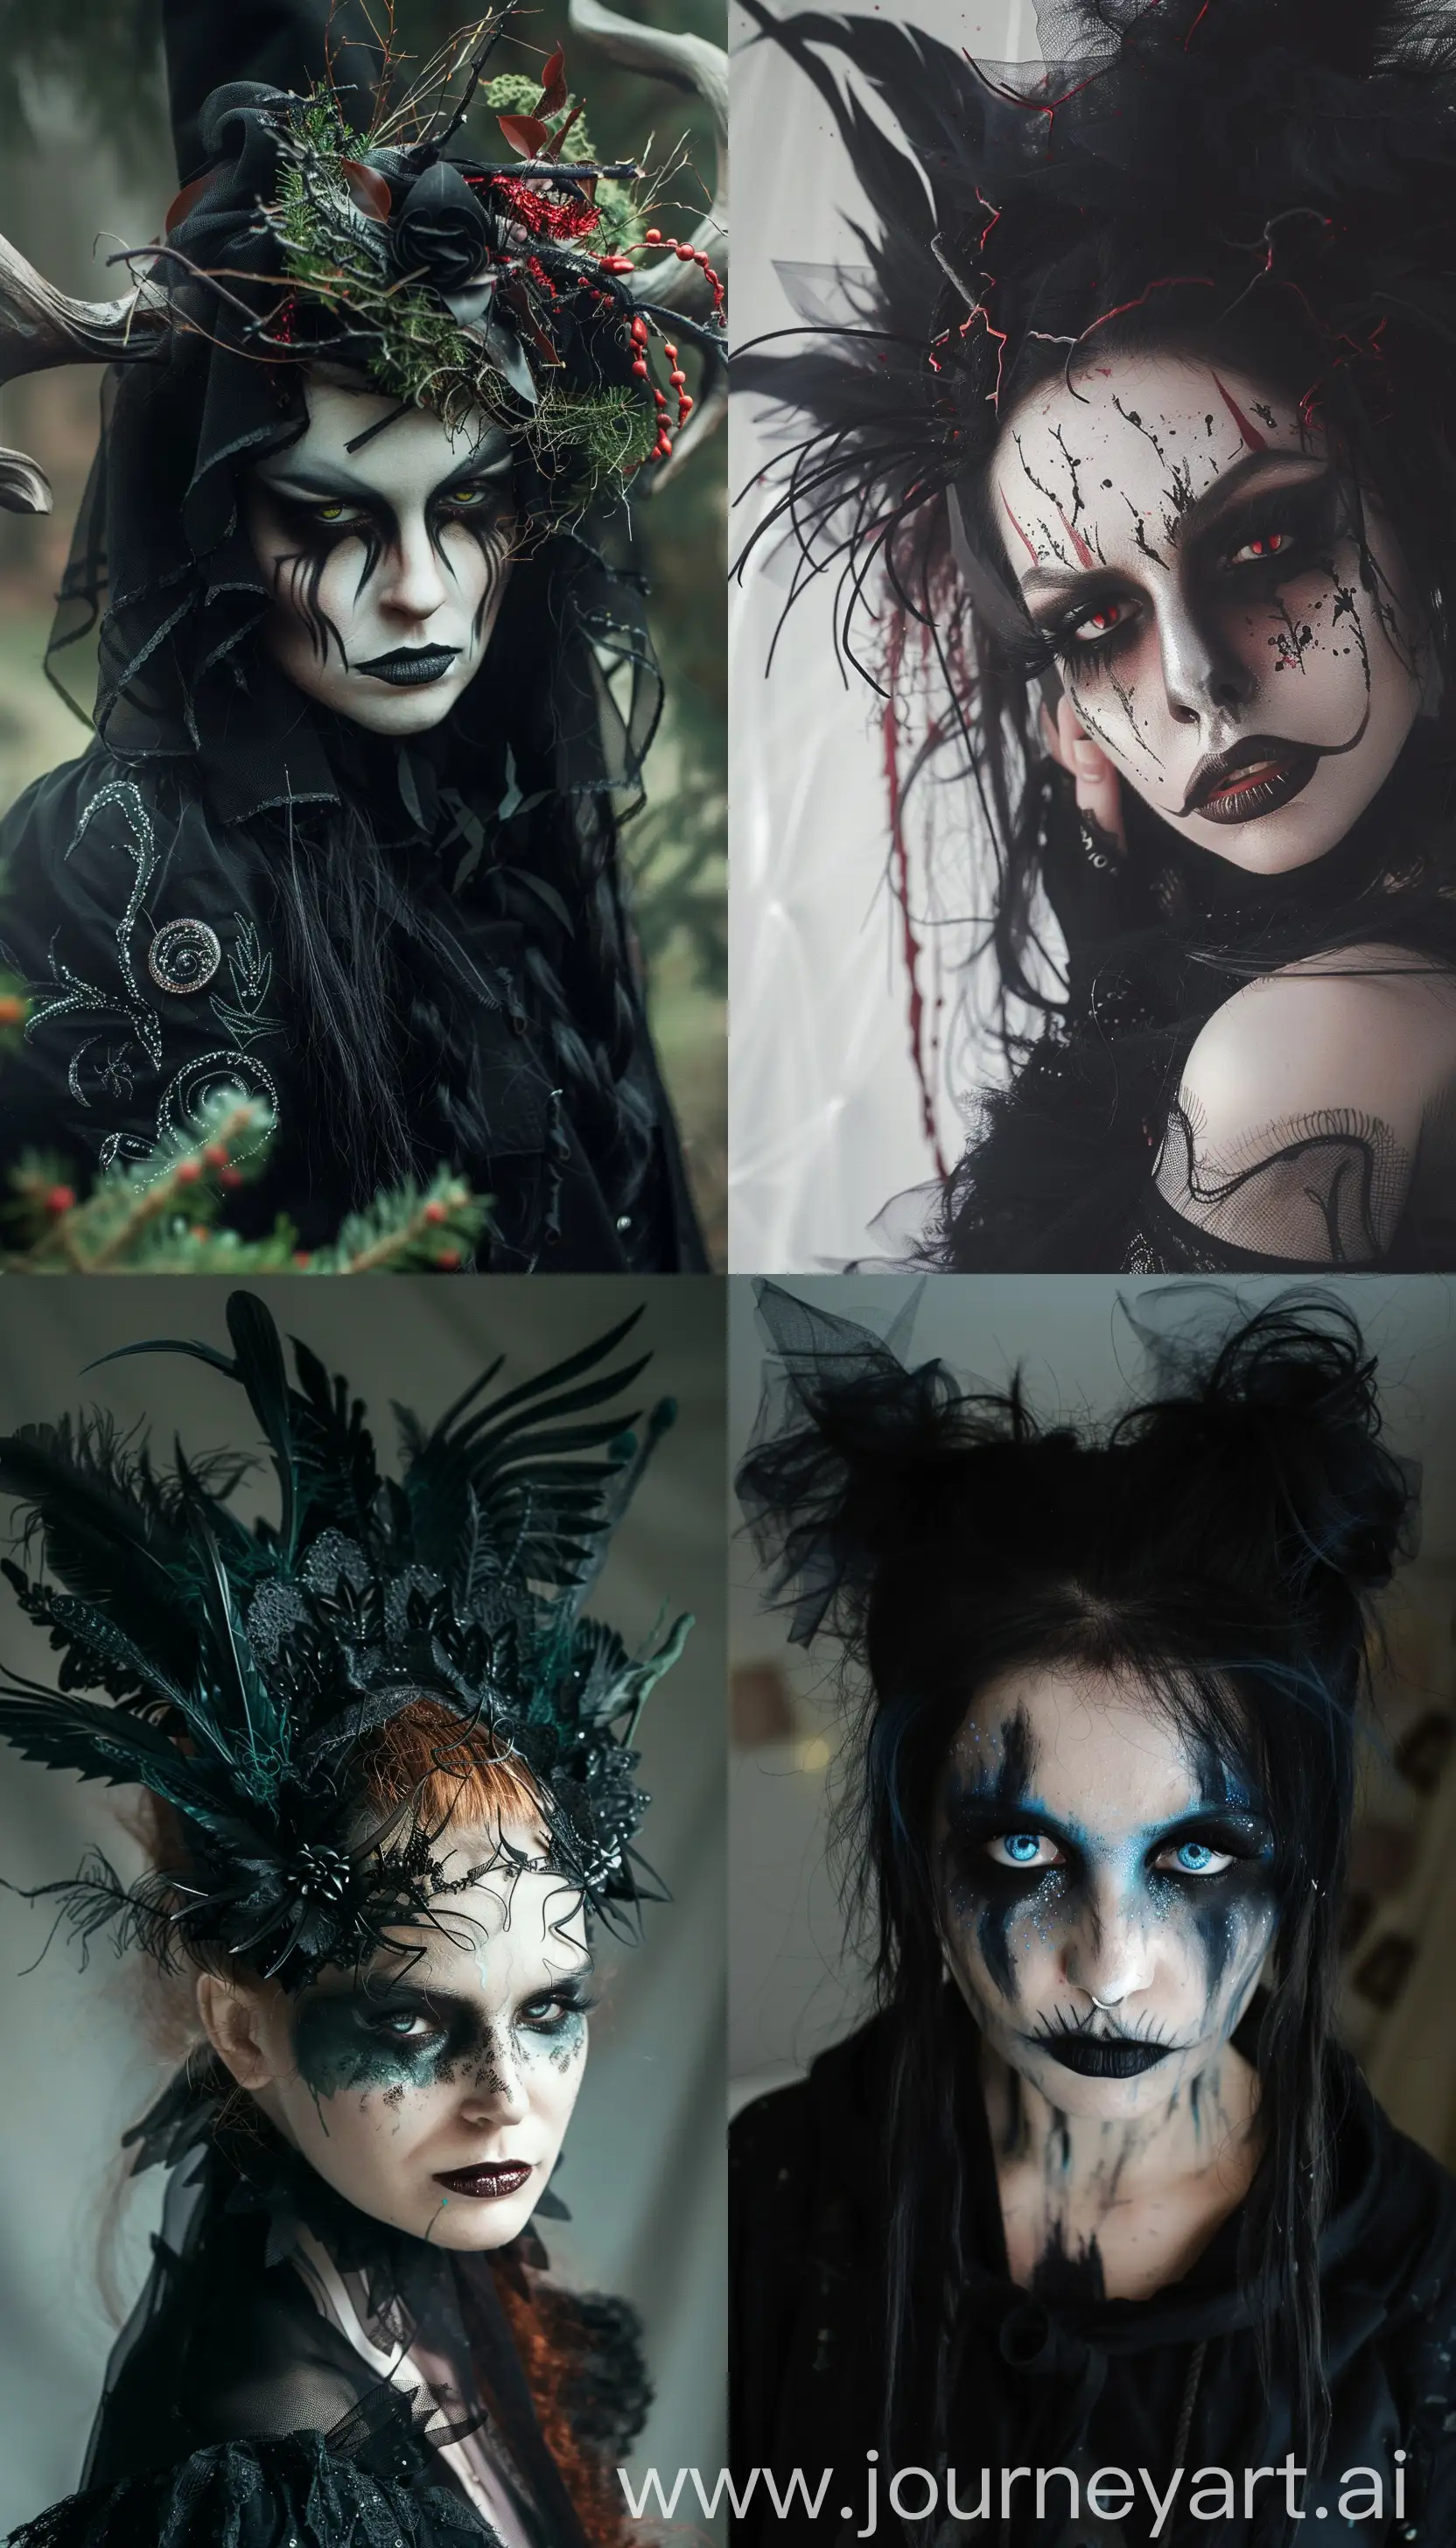 Sinister-Witch-with-Dark-Makeup-and-Horror-Theme